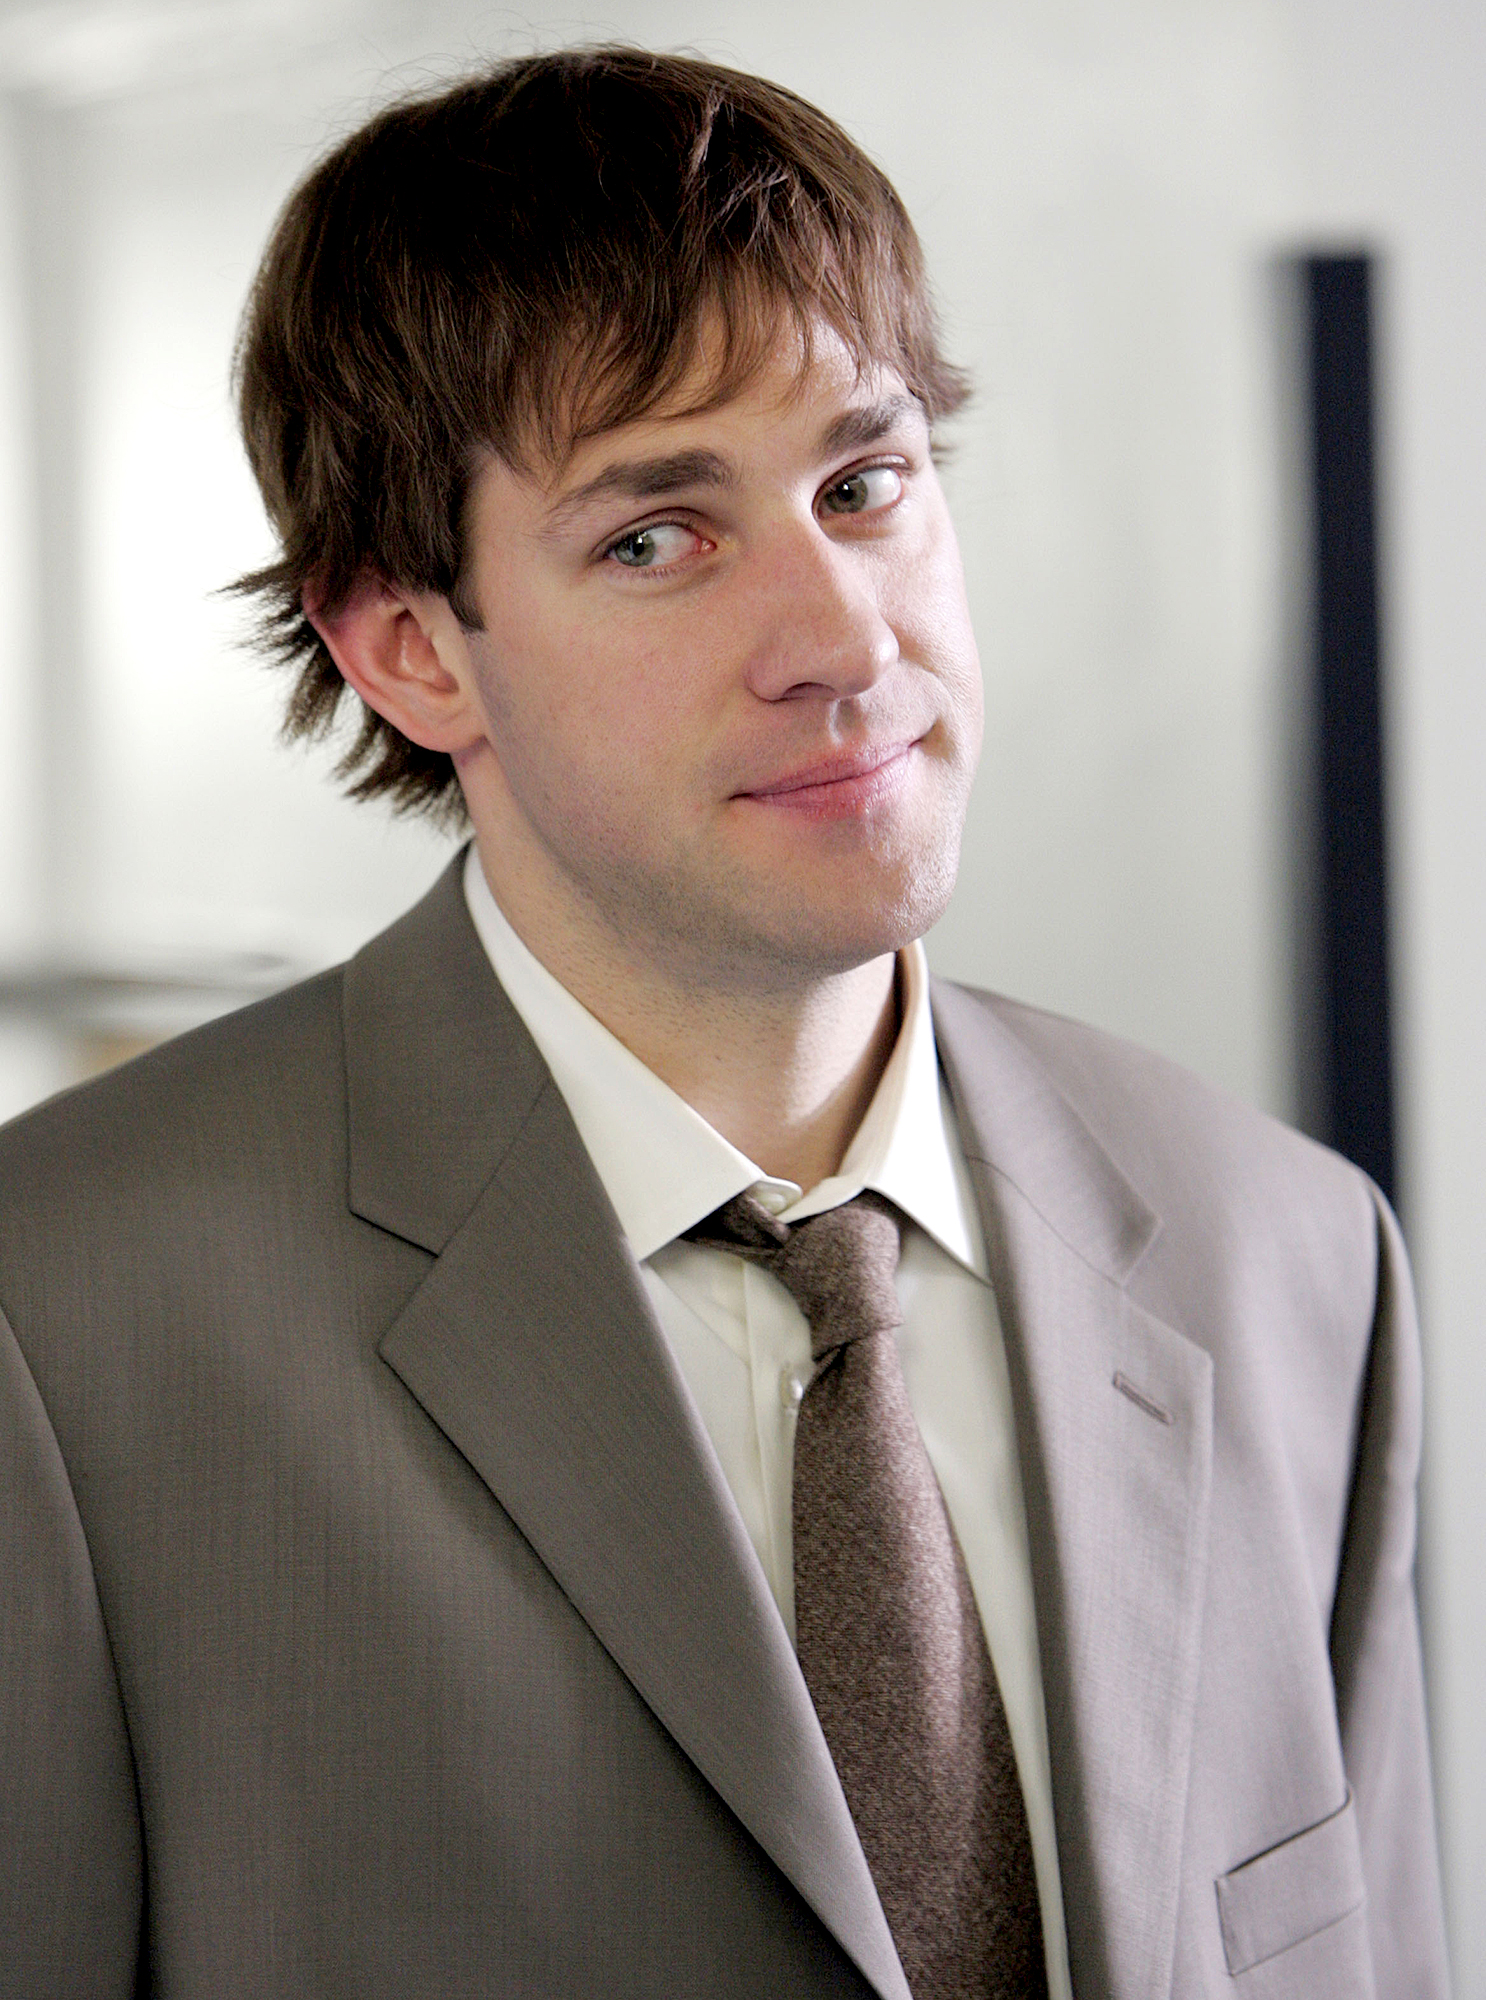 John Krasinski Would 'Absolutely Love' to Do a Reunion of 'The Office'